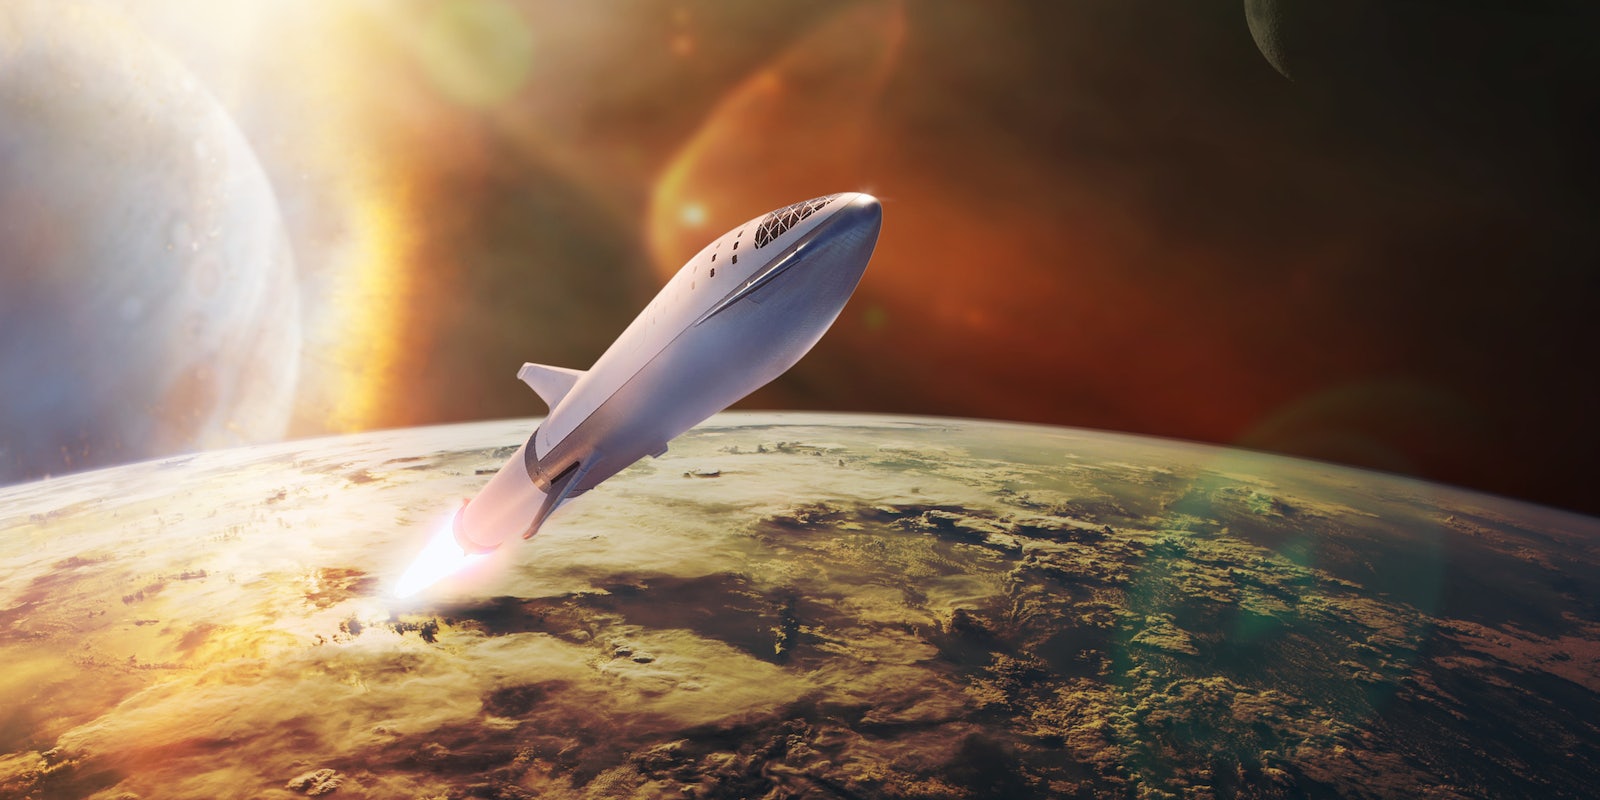 best elon musk birthday gifts featured image - a rocket flying away from earth